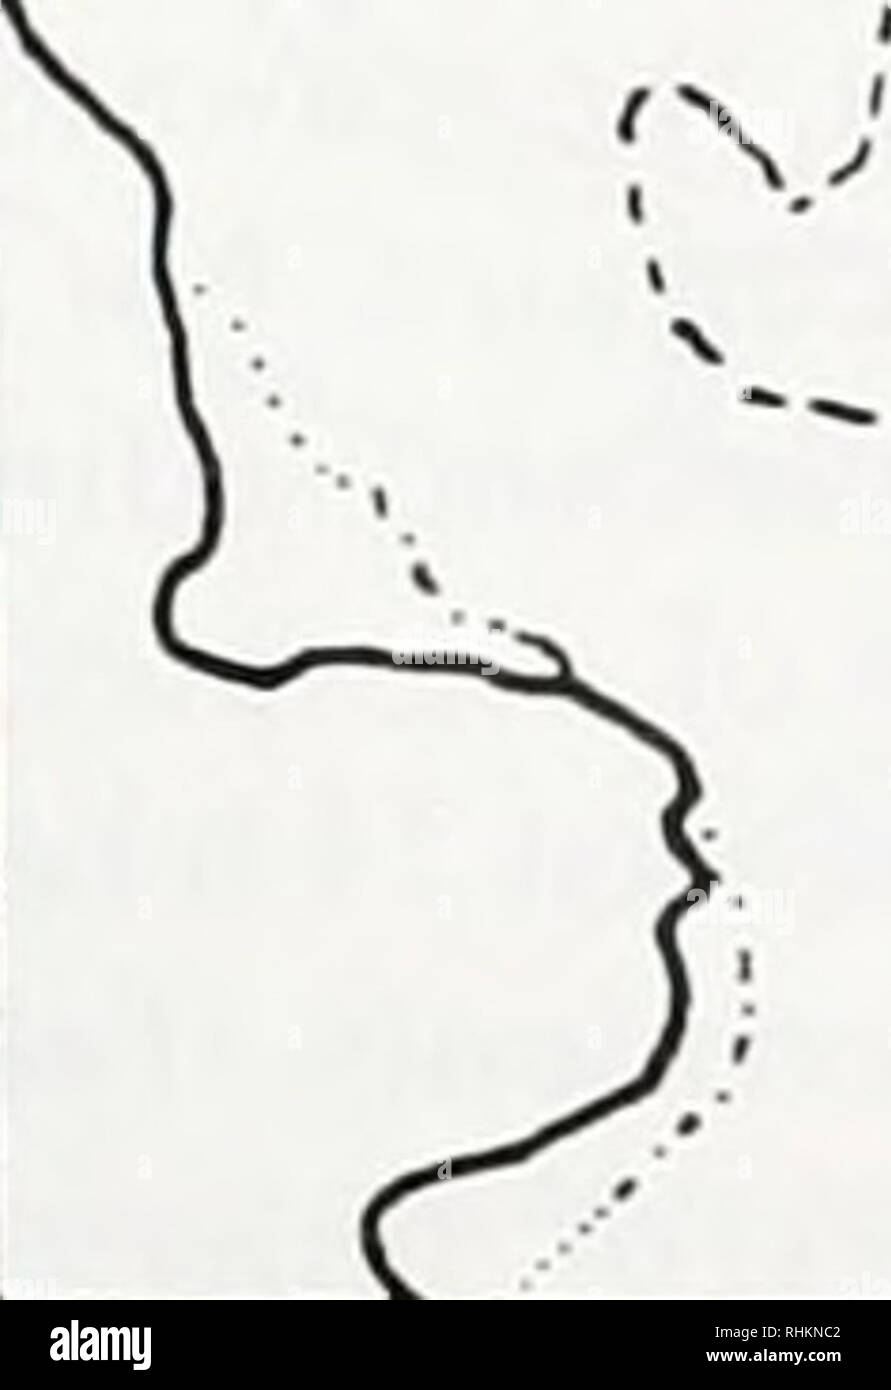 . The Biological bulletin. Biology; Zoology; Biology; Marine Biology. I8&quot;N- JAMAICA 77 °W 3COM B. Q 3 -10' 250 M Figure 3. Map of Discovery Bay, Jamaica (from Sides, 1481). (A) Overview of the bay. Dotted line = 10-meter depth contour. (B) Detail of the western half of the hay showing backreef collecting sites (I -4). given elsewhere (LeClair, 1994. 1995, 1996: see also Robbins, 1986; Smith el ai. 1995). In contrast to non- keeled vertebral ossicles (Fig. 4A), keeled vertebral ossi- cles have reduced articulating projections, a large notch on the proximal aboral surface, and an aboral, di Stock Photo